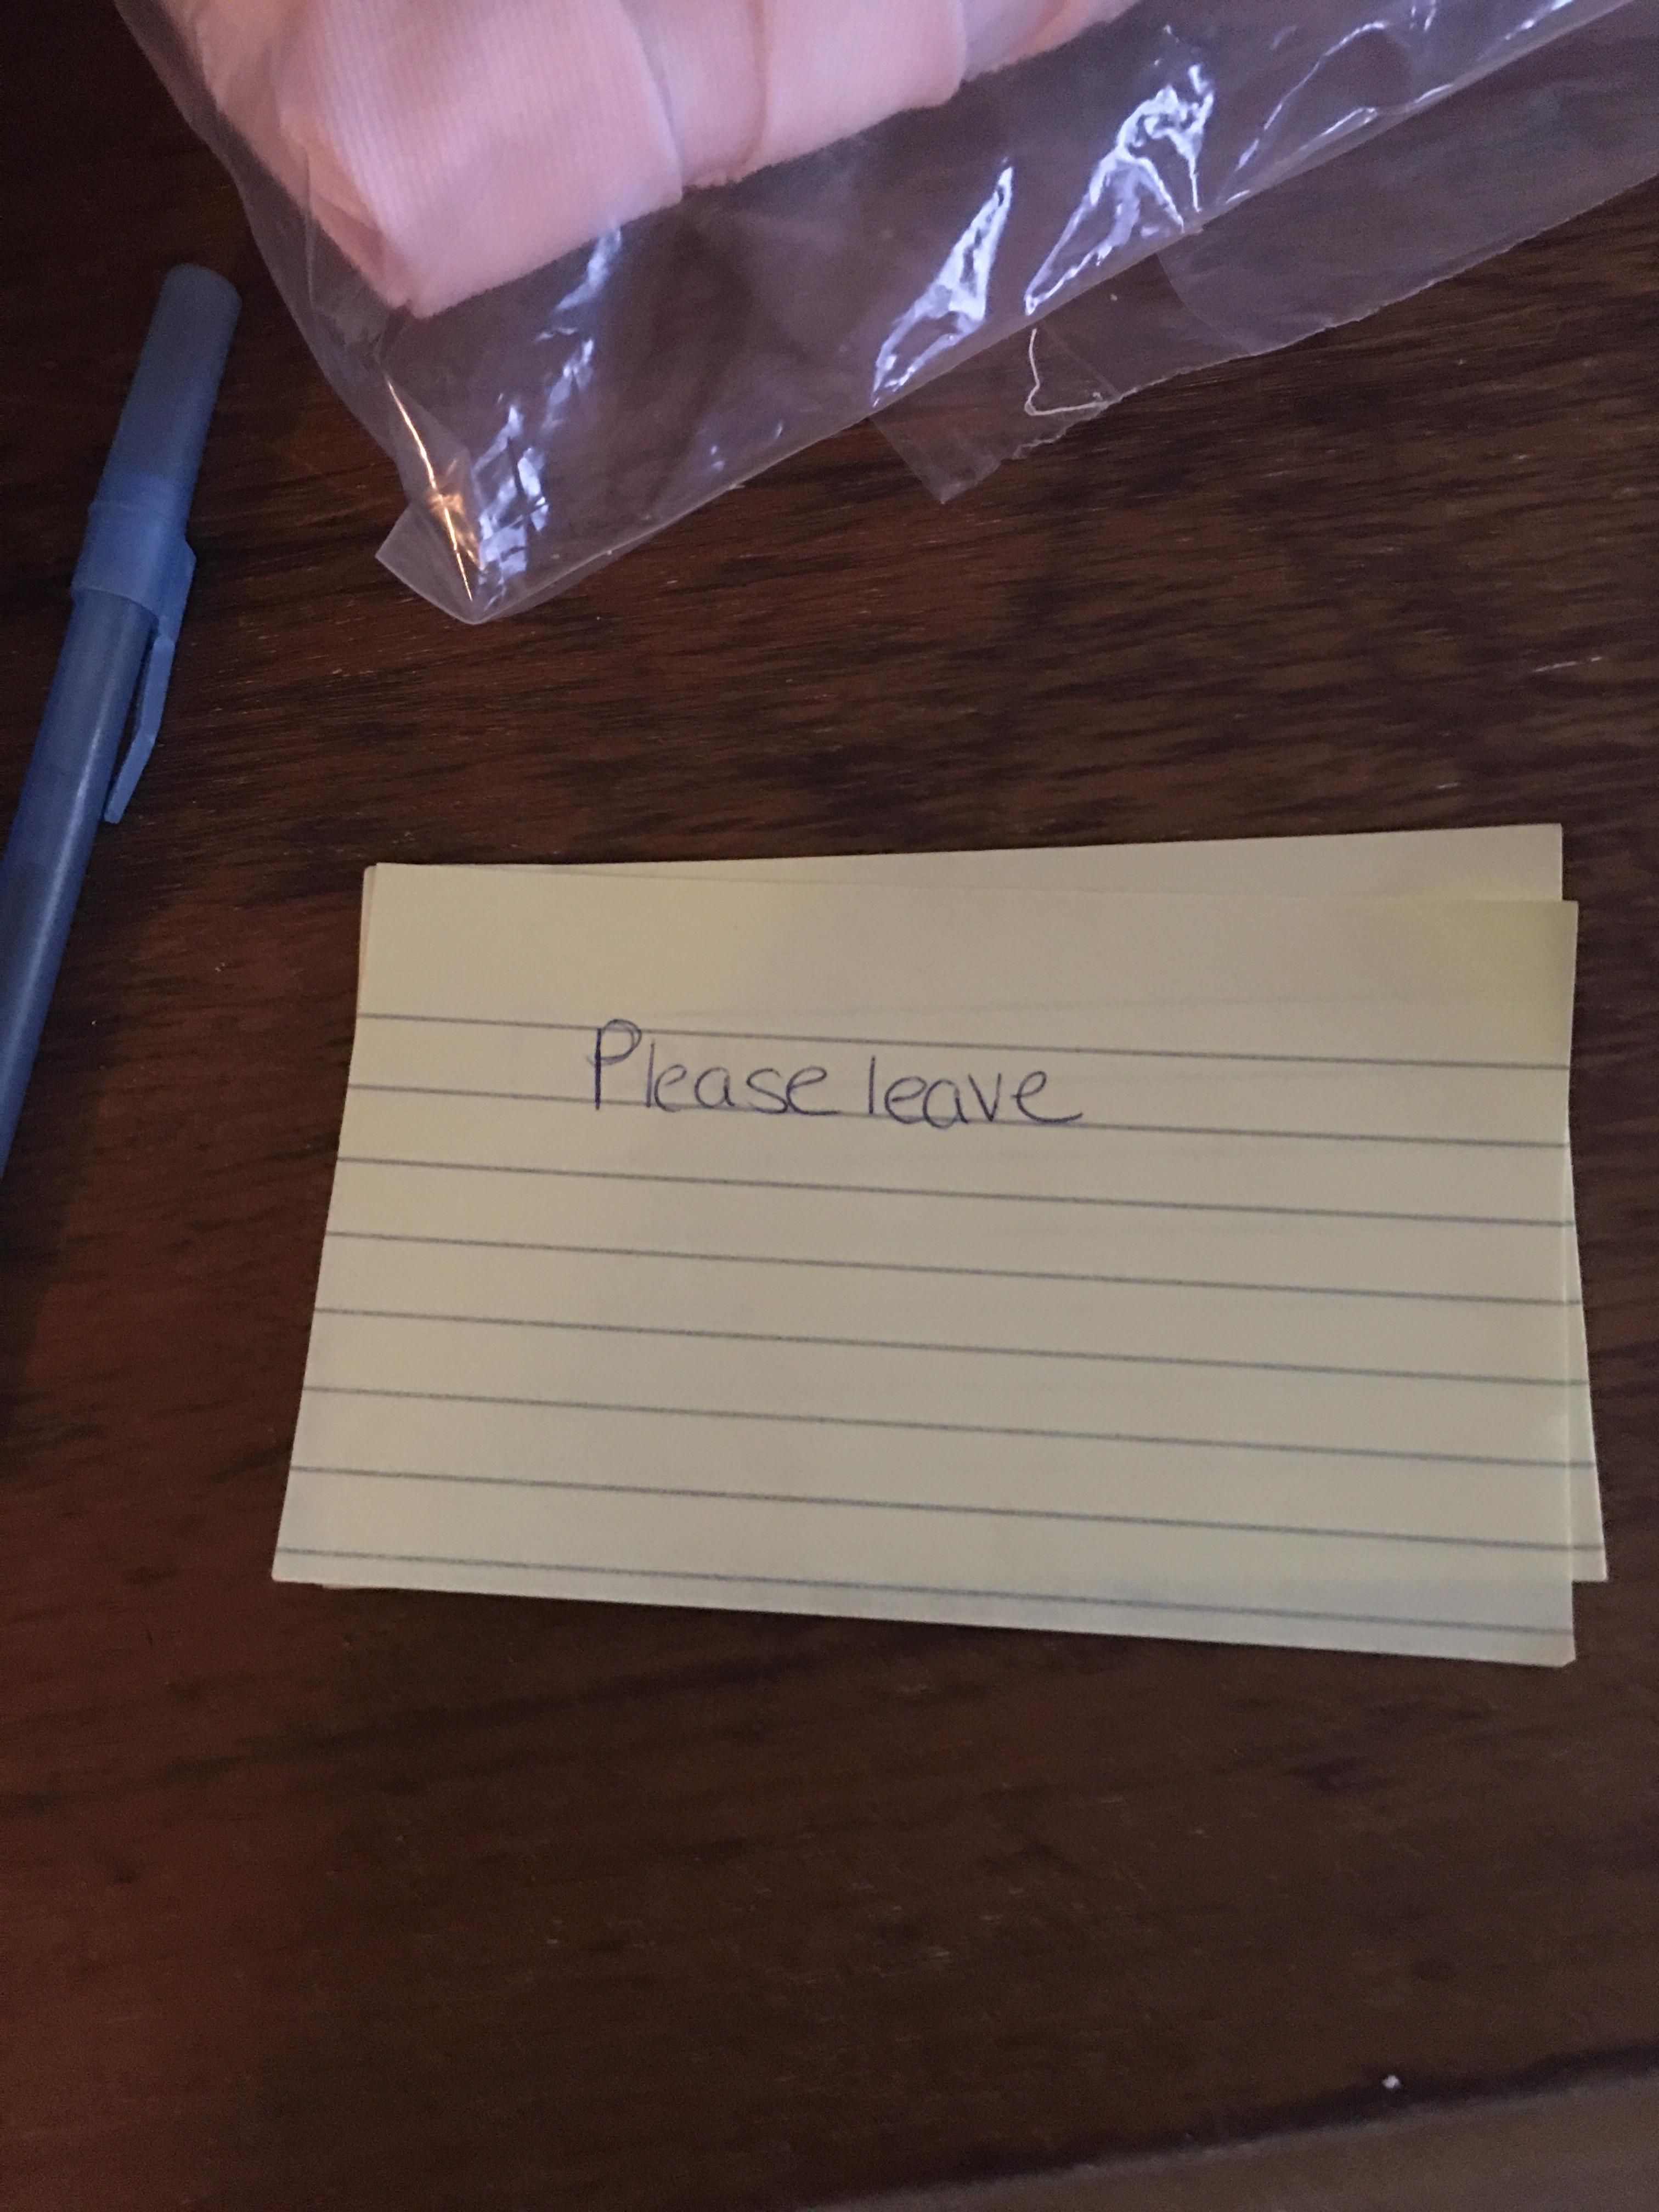 My wife leaves me notes in the morning. I hope this one’s not finished.